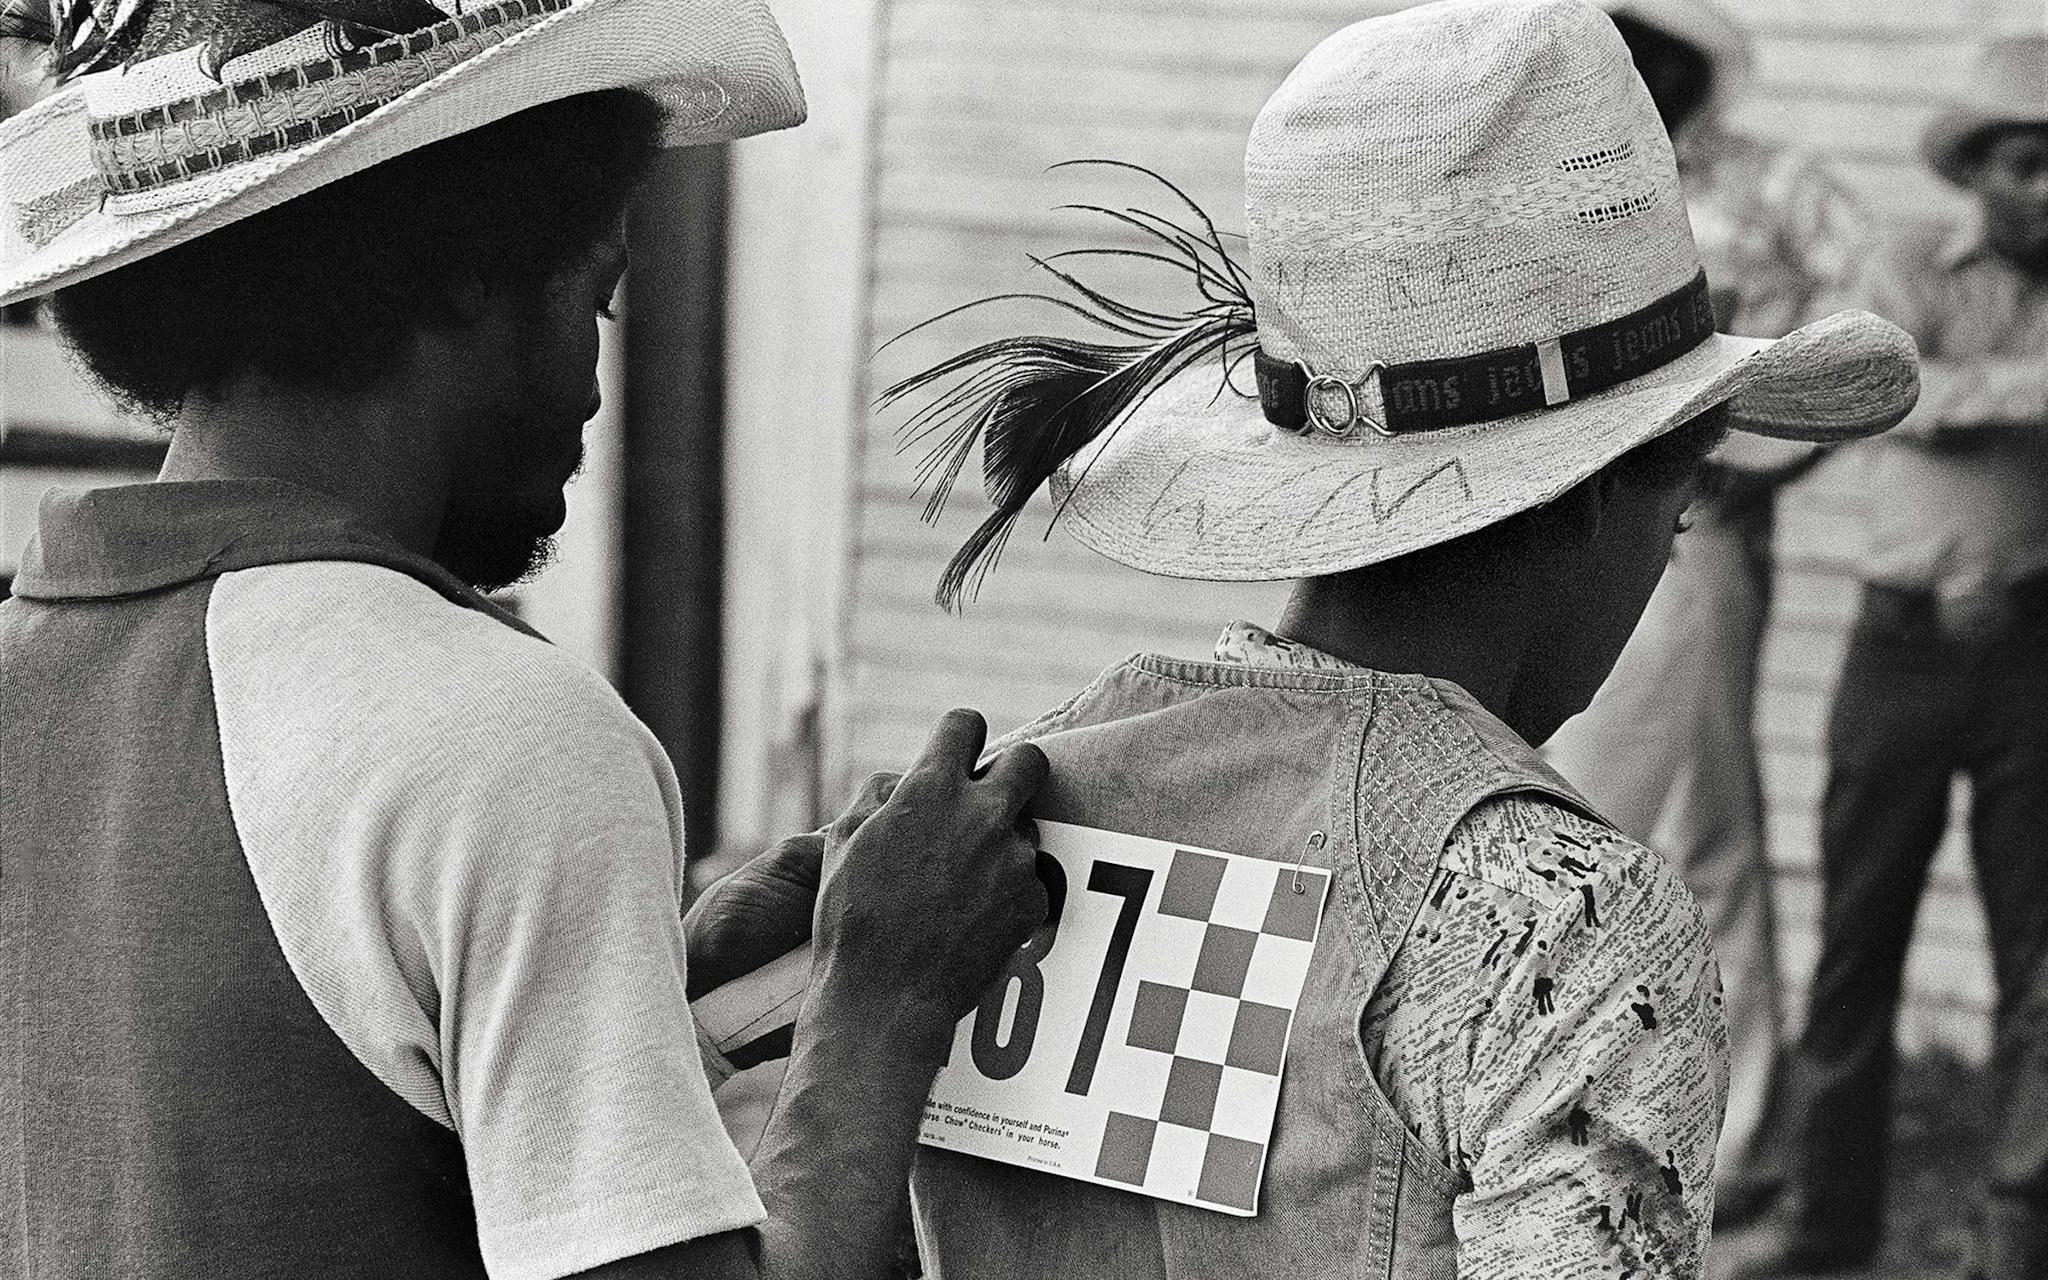 At the Diamond L arena in the summer of 1978, a couple of bronc riders helping each other pin on their contestant numbers.